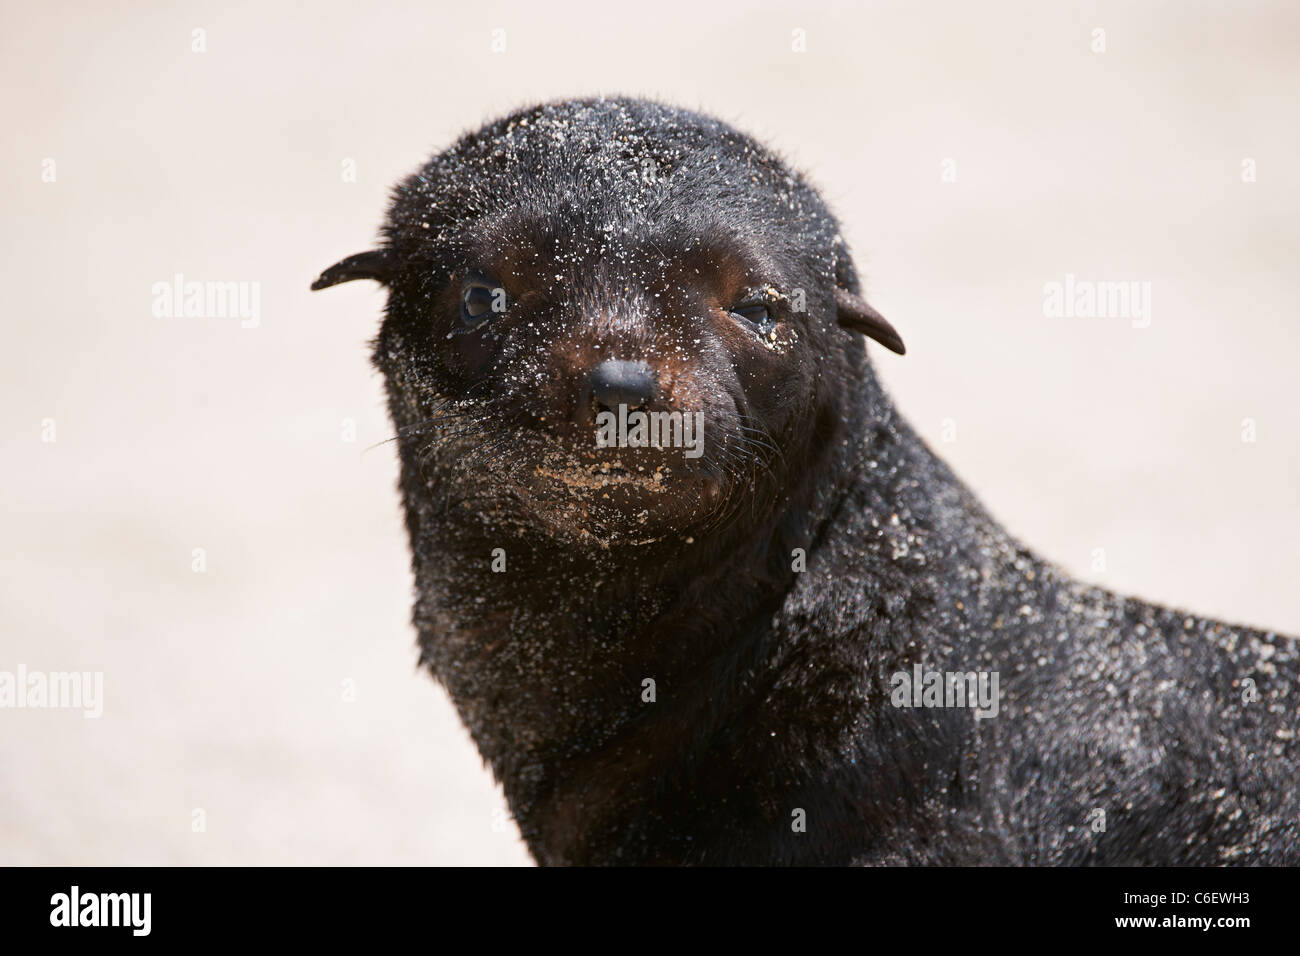 youngster in colony of Brown fur seals, Arctocephalus pusillus, Cape Cross on the Skeleton Coast of Namibia, Africa Stock Photo